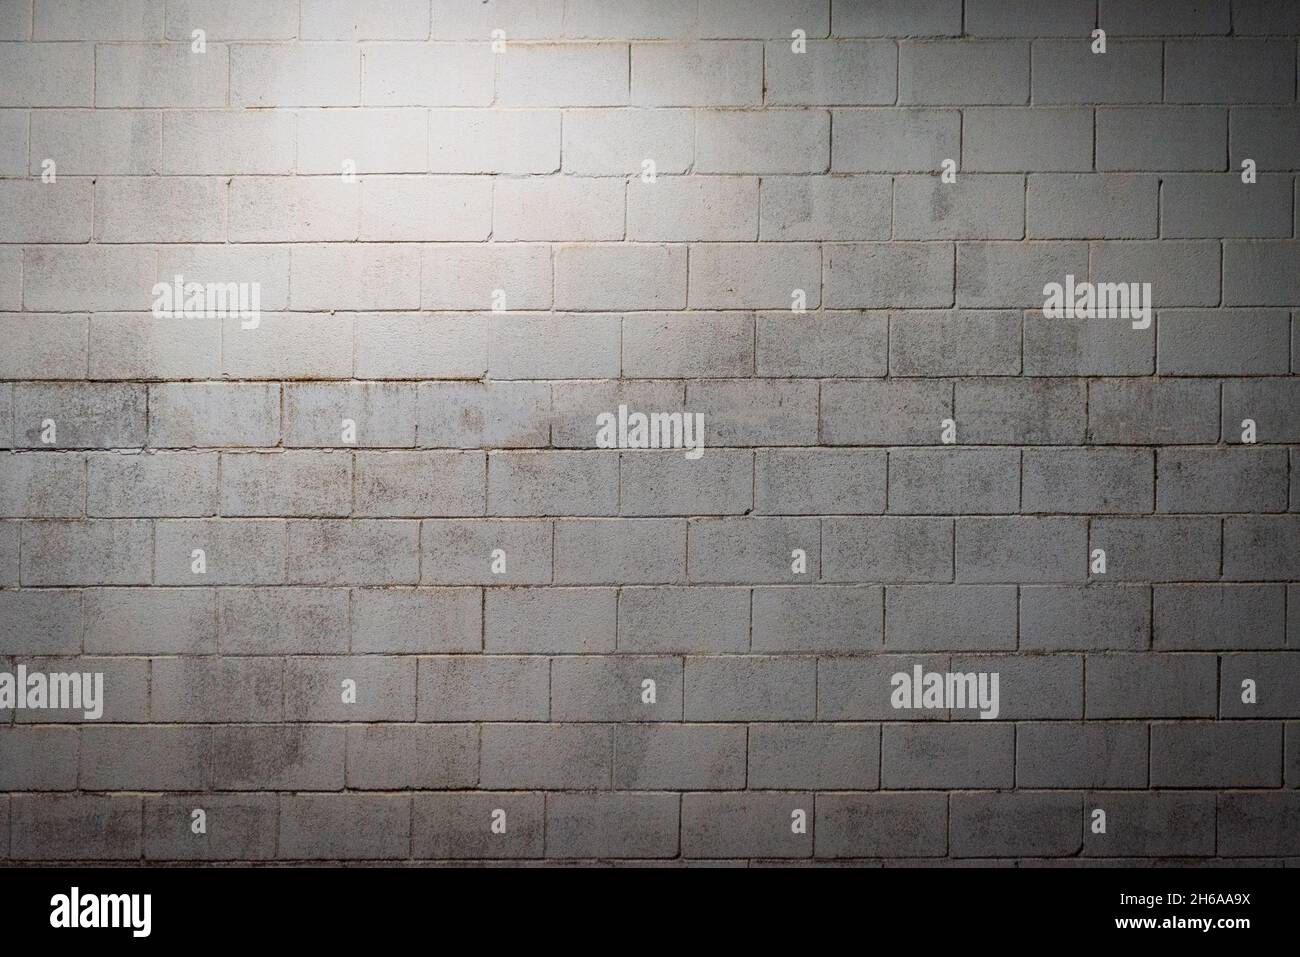 White block wall aged by humidity and illuminated with overhead light. Background. Stock Photo